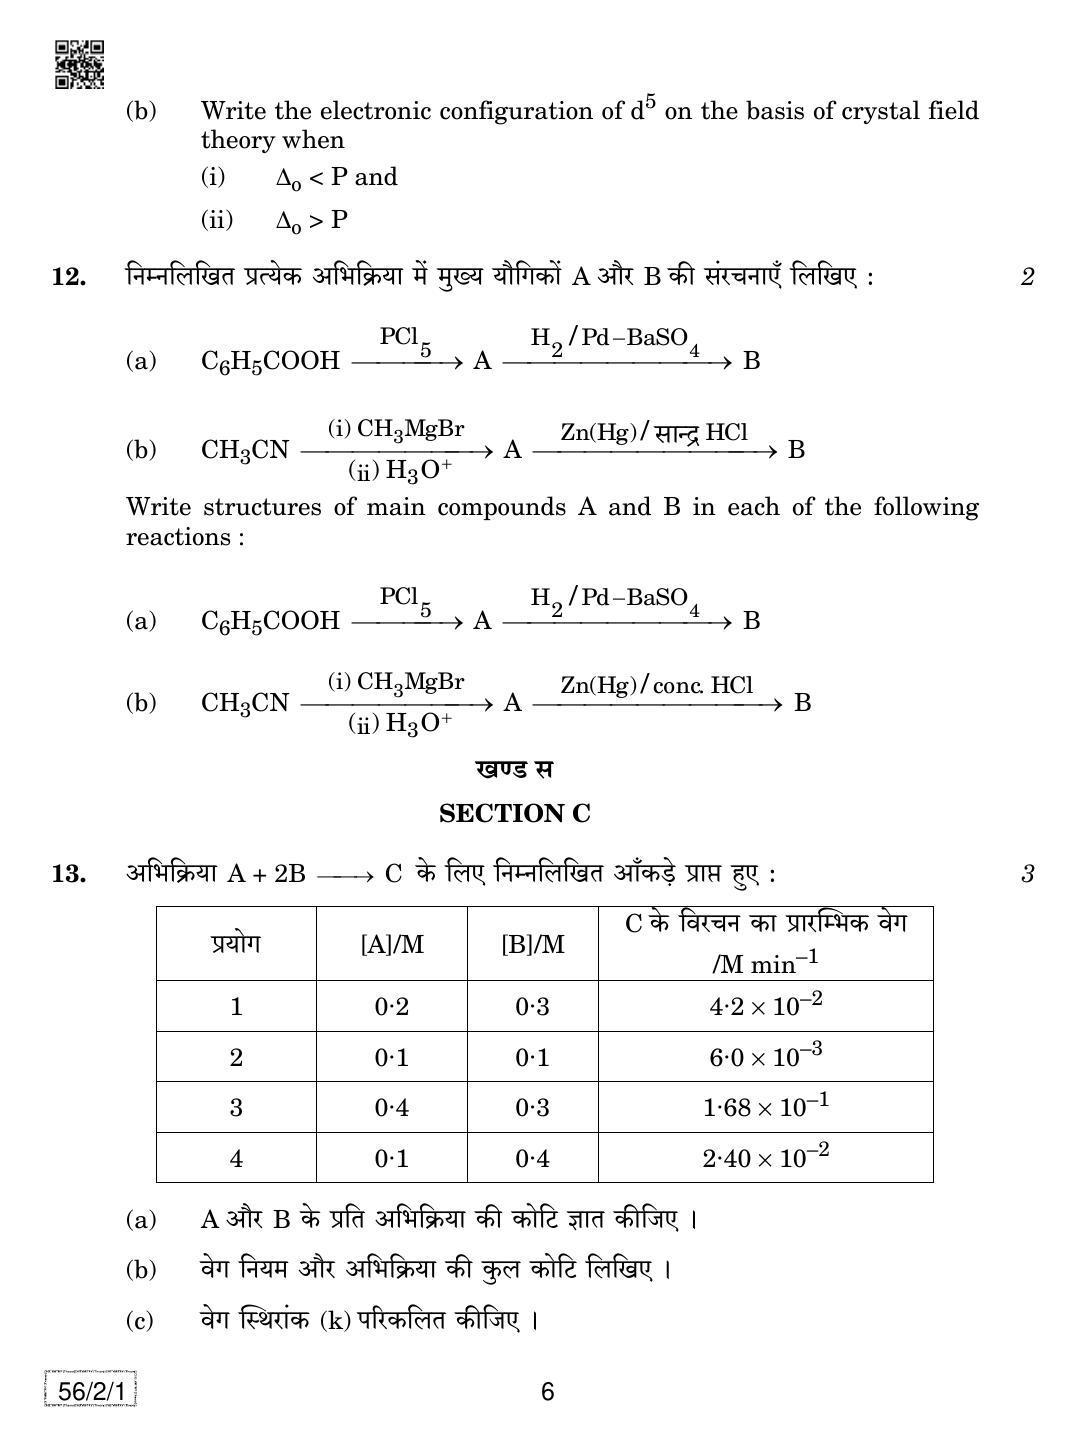 CBSE Class 12 56-2-1 Chemistry 2019 Question Paper - Page 6